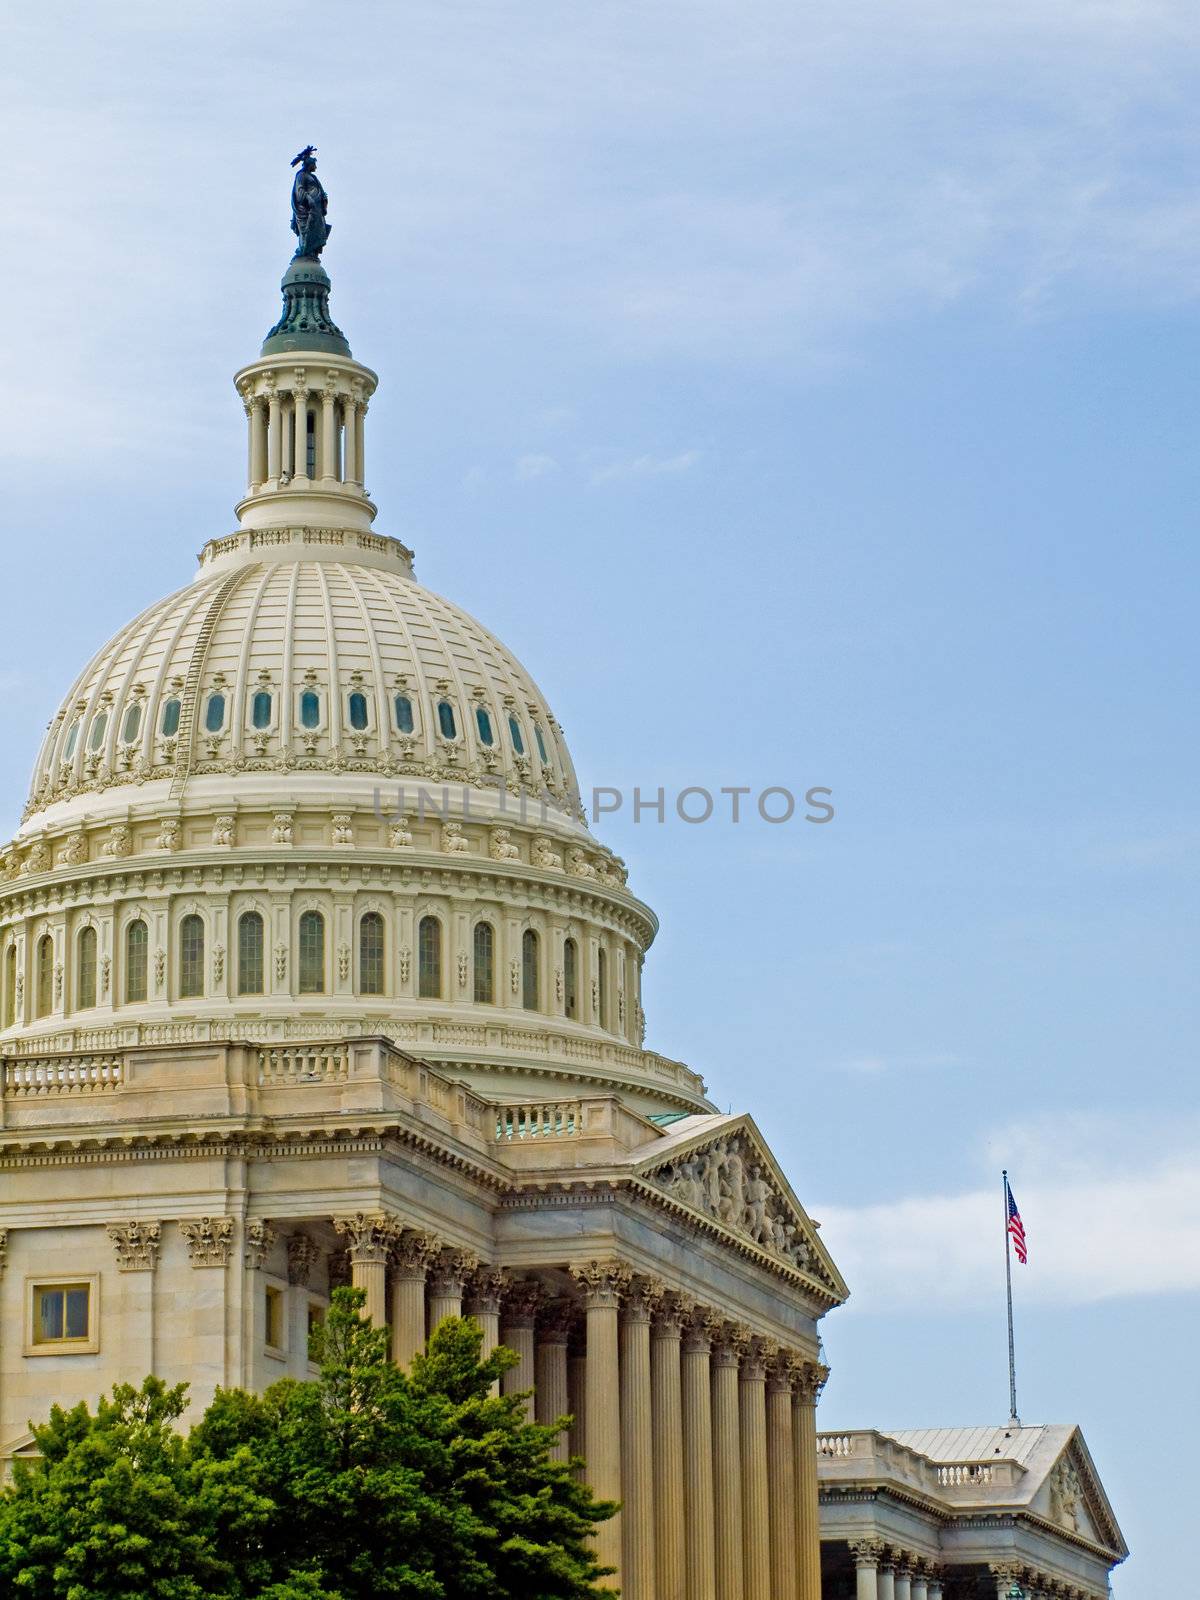 United States Capitol Building in Washington DC